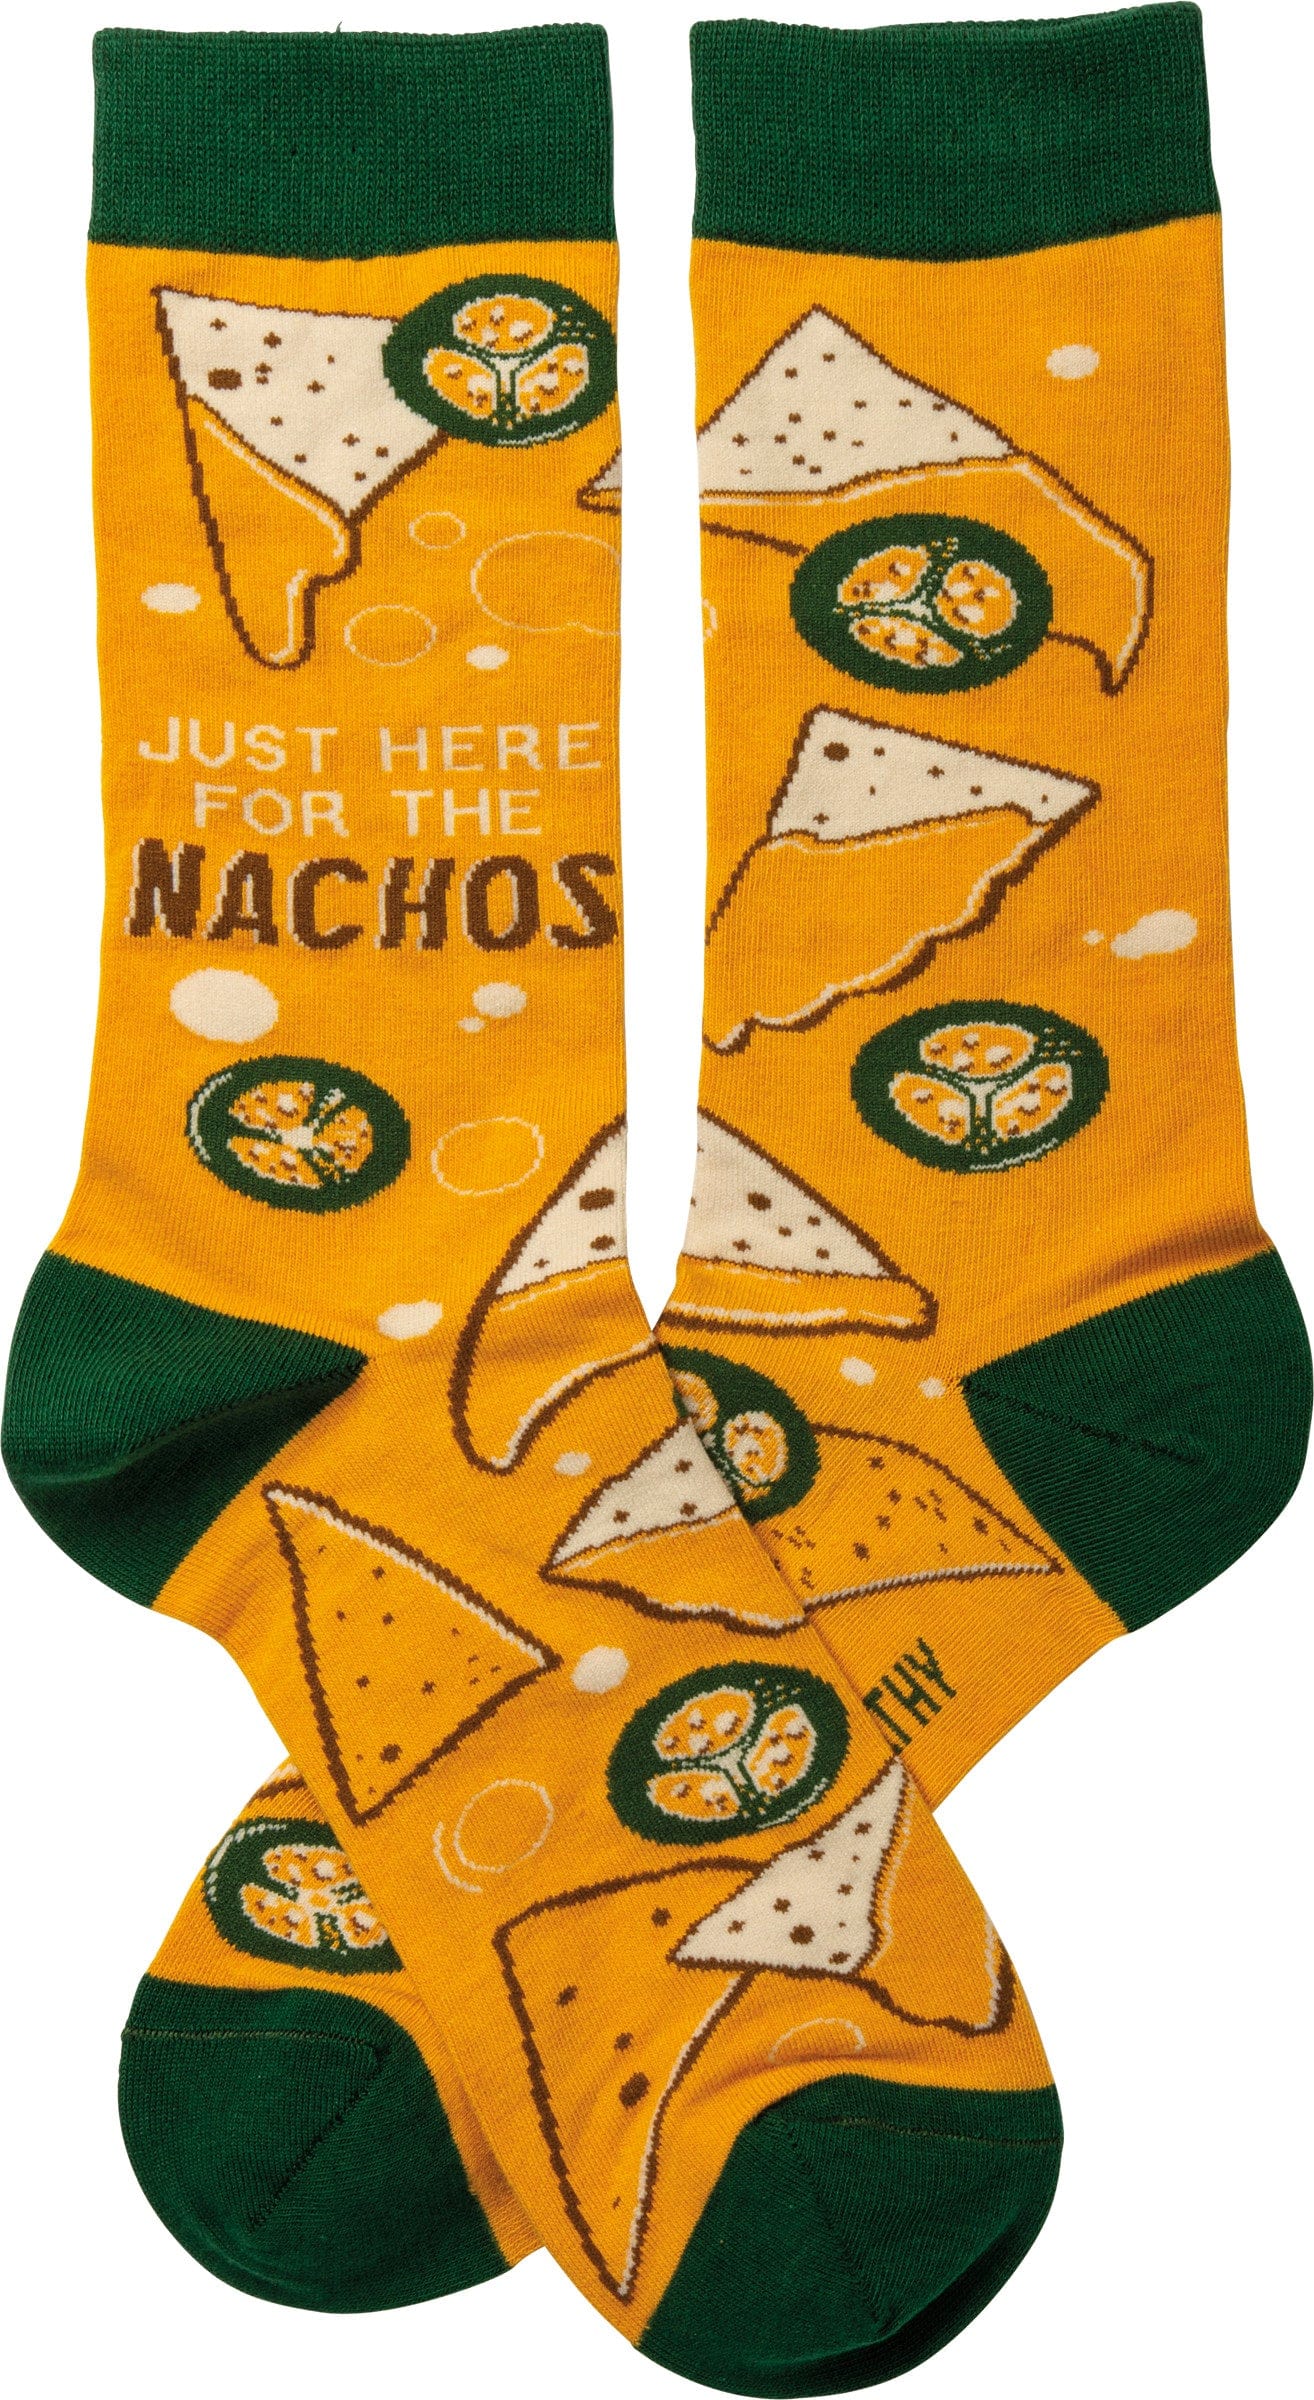 Socks One Size Fits Most Socks - Just Here For The Nachos PBK-105092